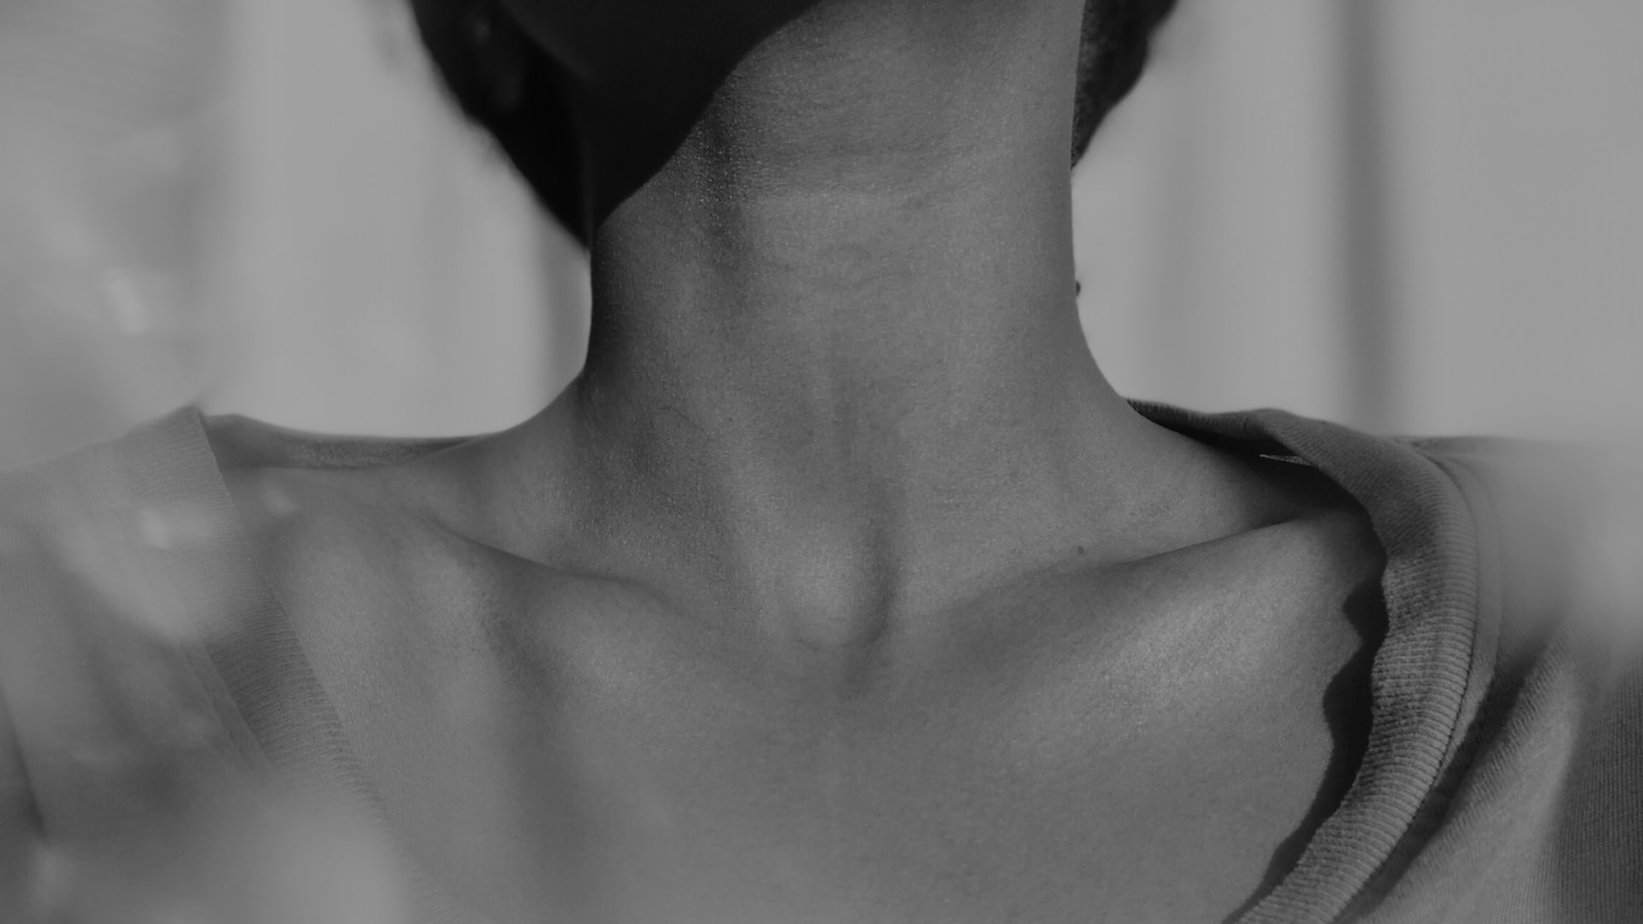 Caring for your neckline: Essential skincare tips and techniques